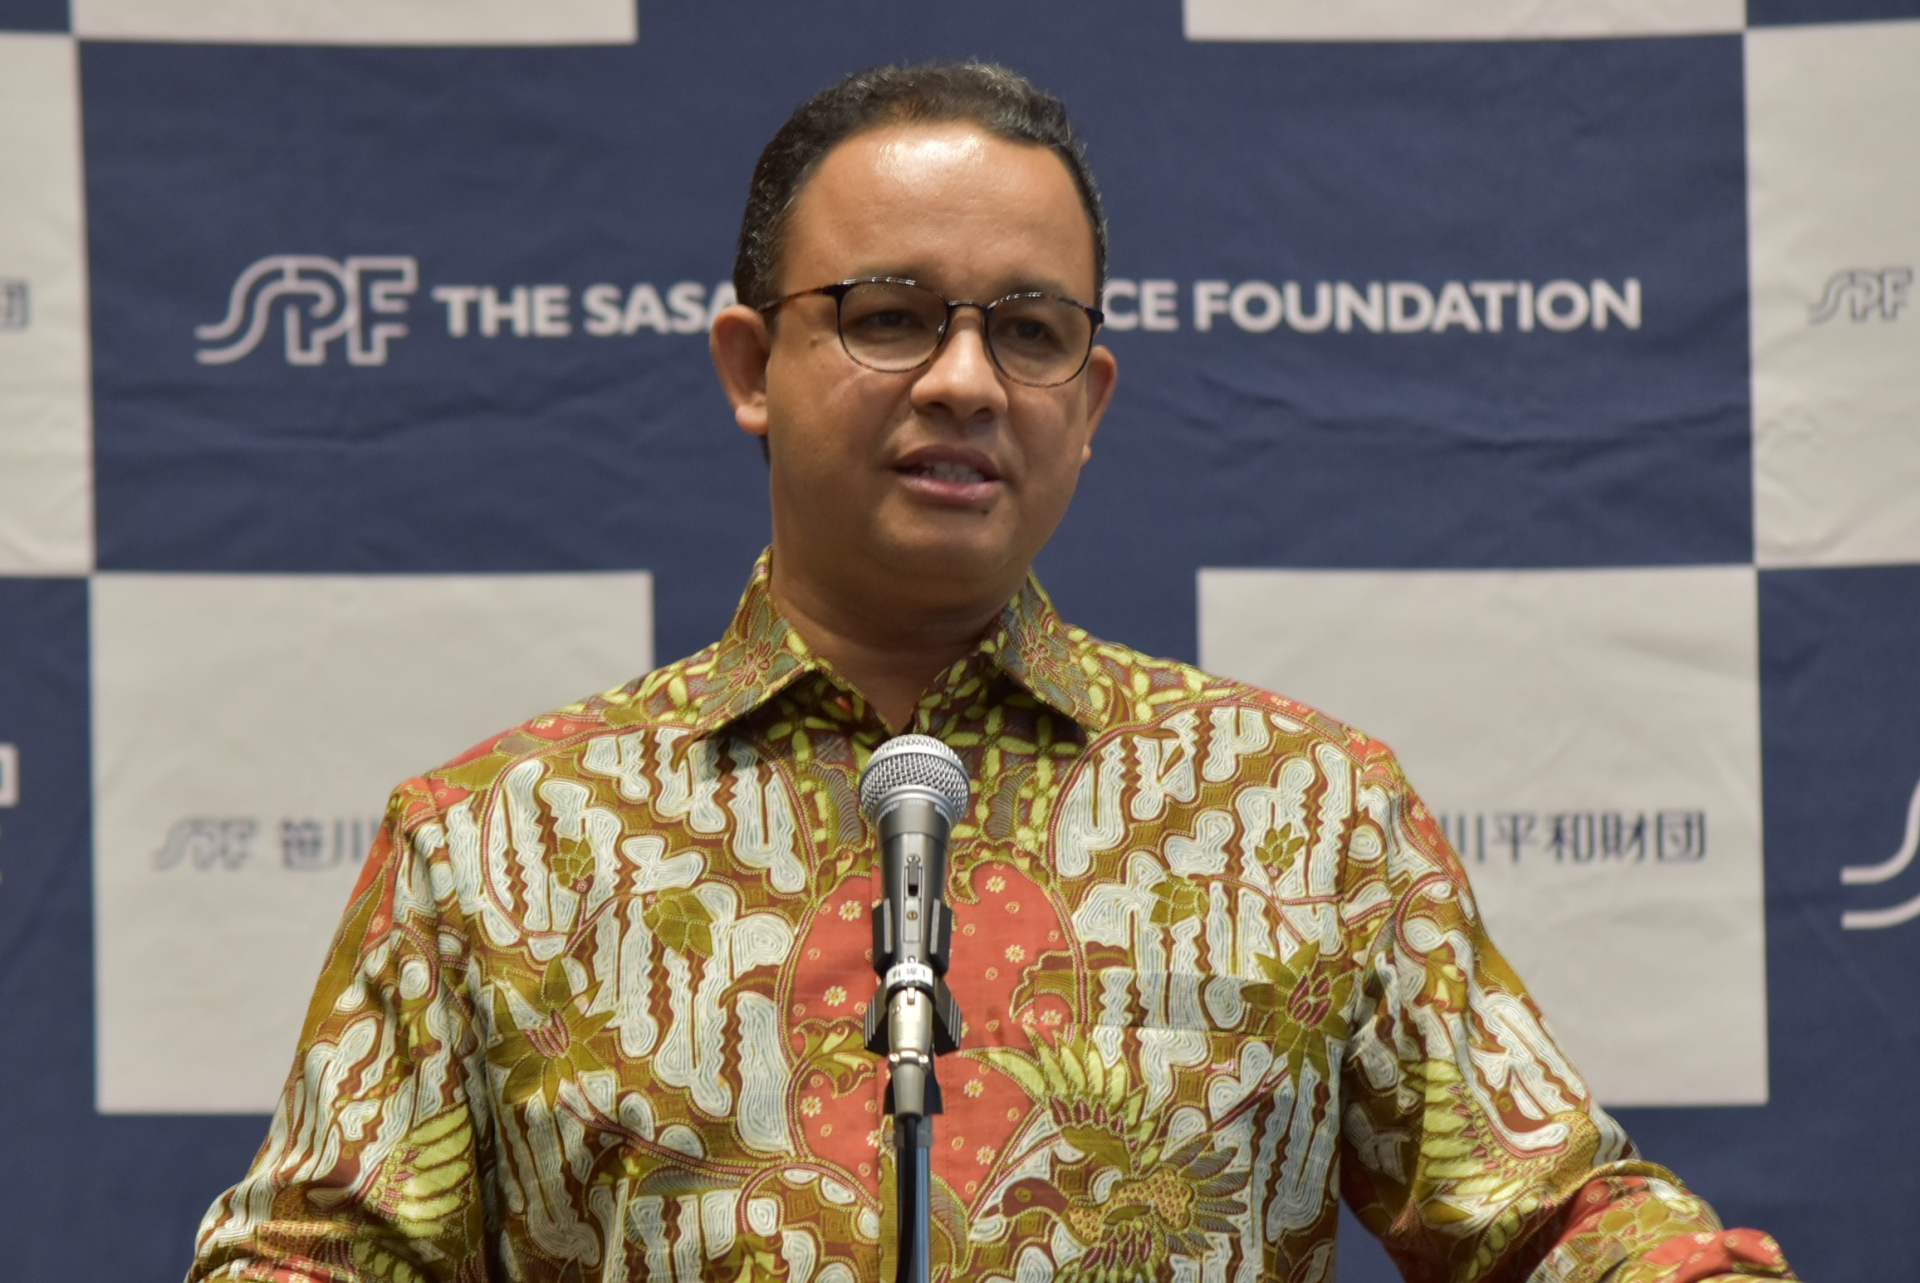 Interview with Dr. Anies Rasyid Baswedan, Challenges of the young Governor of Jakarta, where multiple ethnic groups and cultures coexist